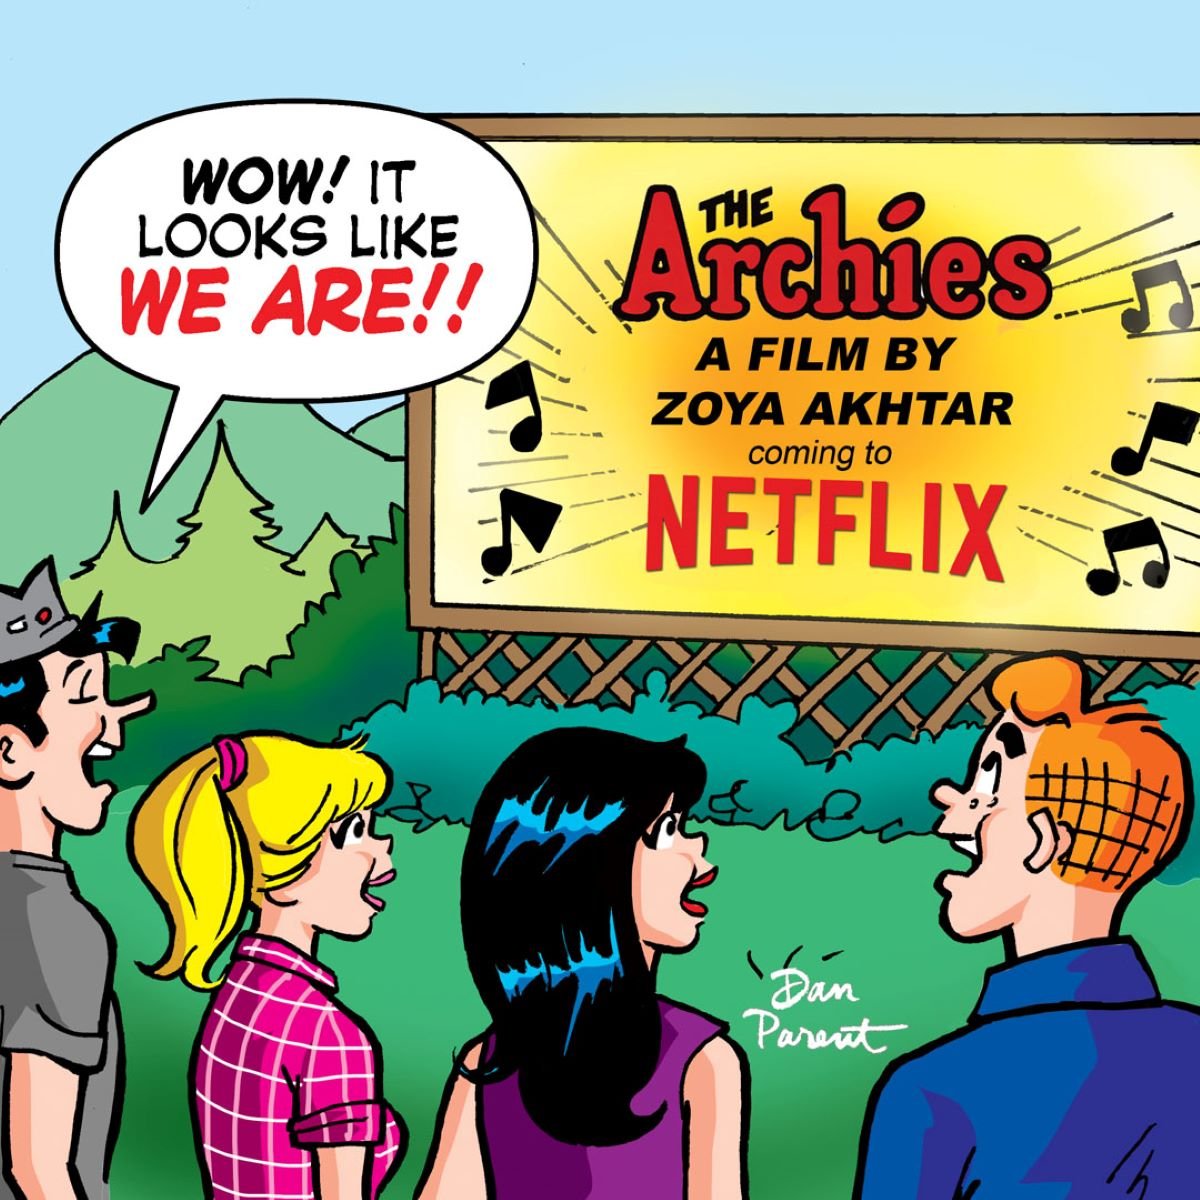 'The Archies' Graphic featuring Archie, Jughead, Bett, and Veronica looking at a sign for the upcoming movie